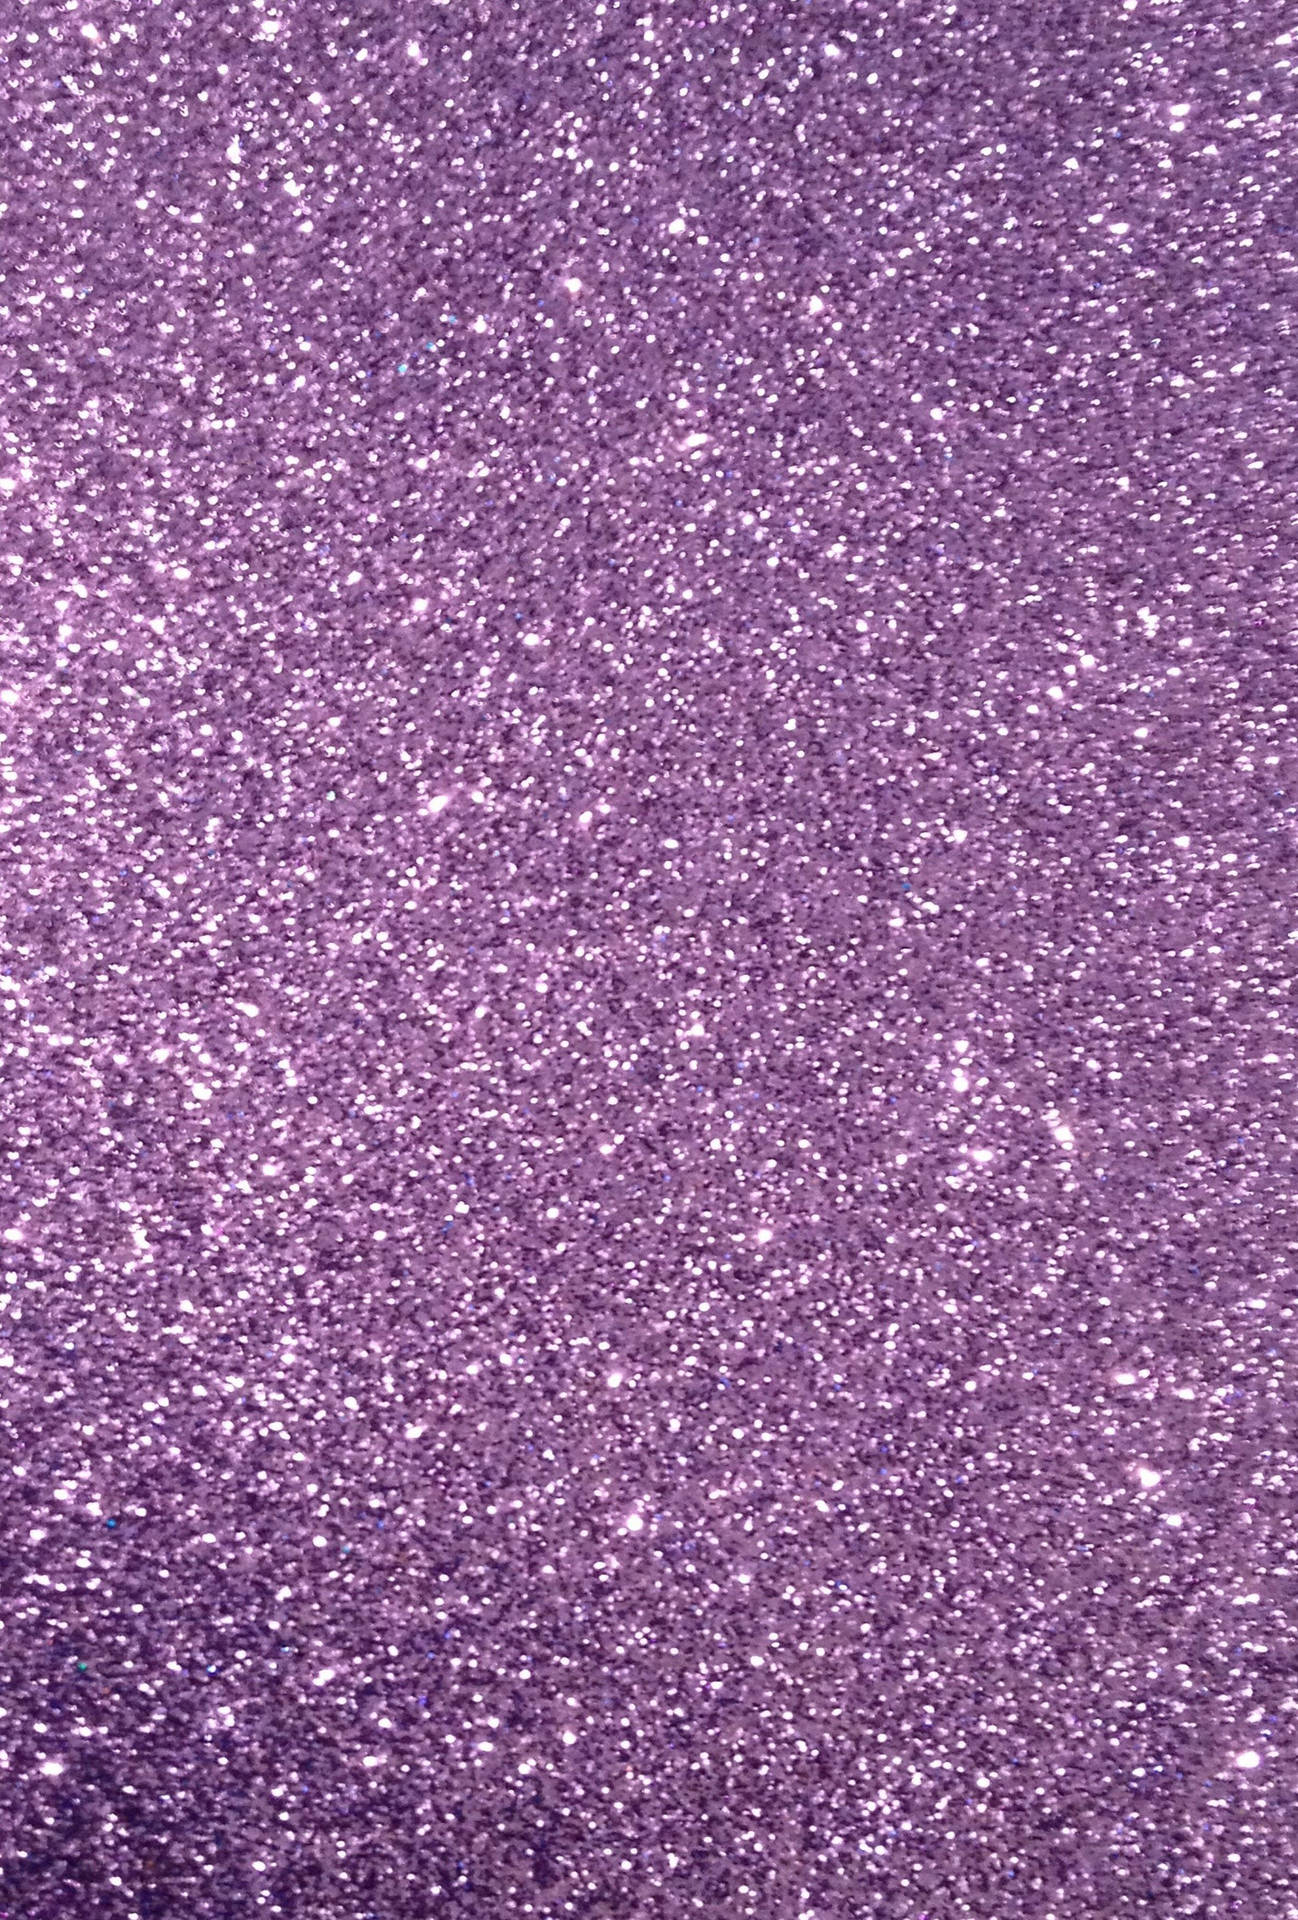 Sparkly Glitters On A Purple Background Wallpaper